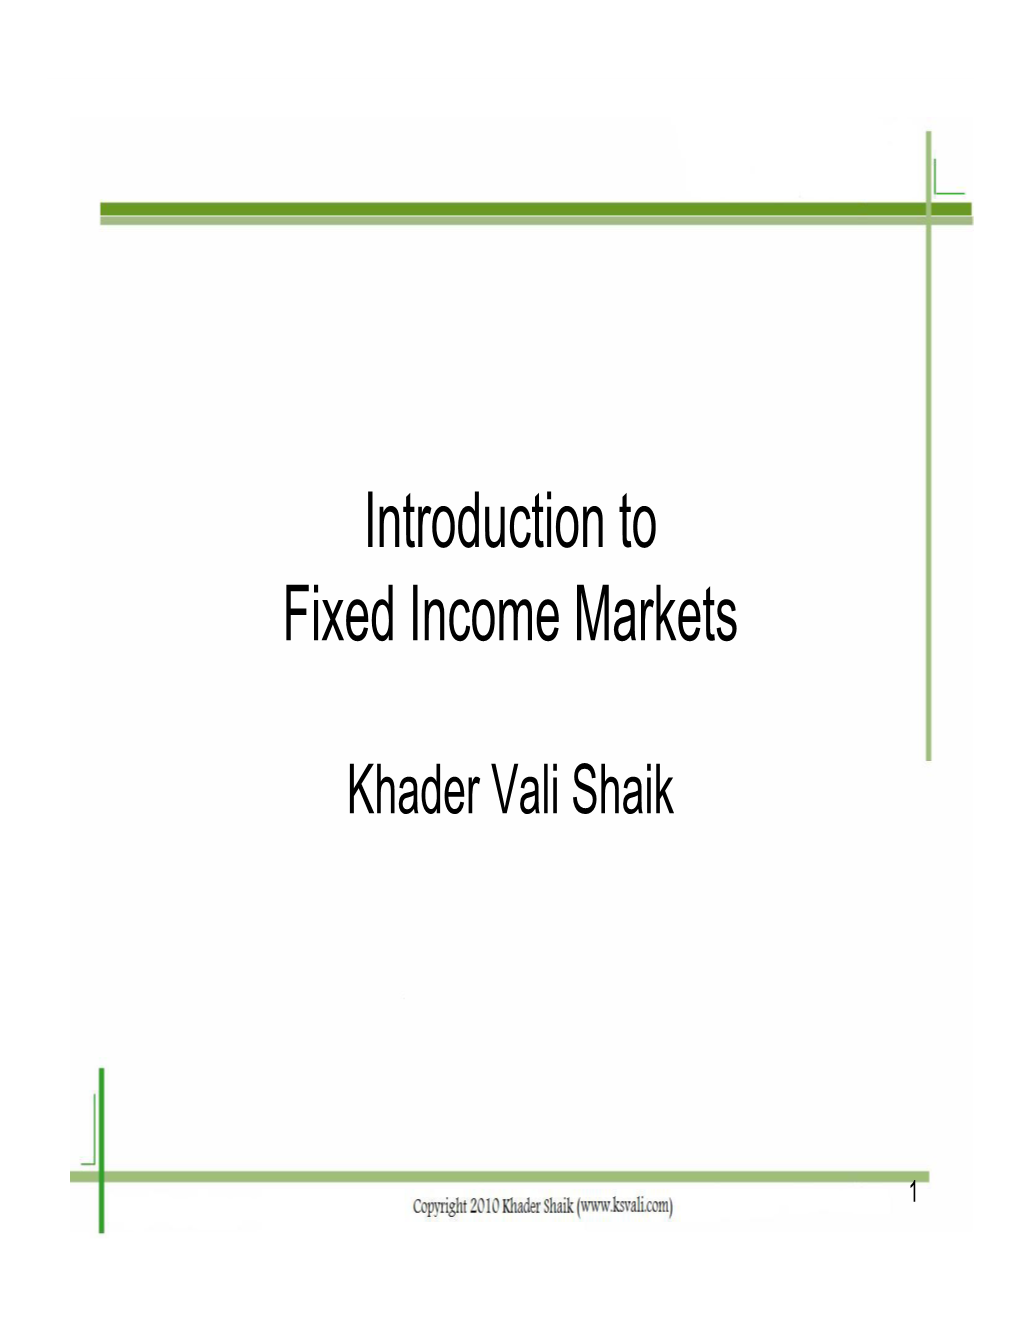 Introduction to Fixed Income Markets